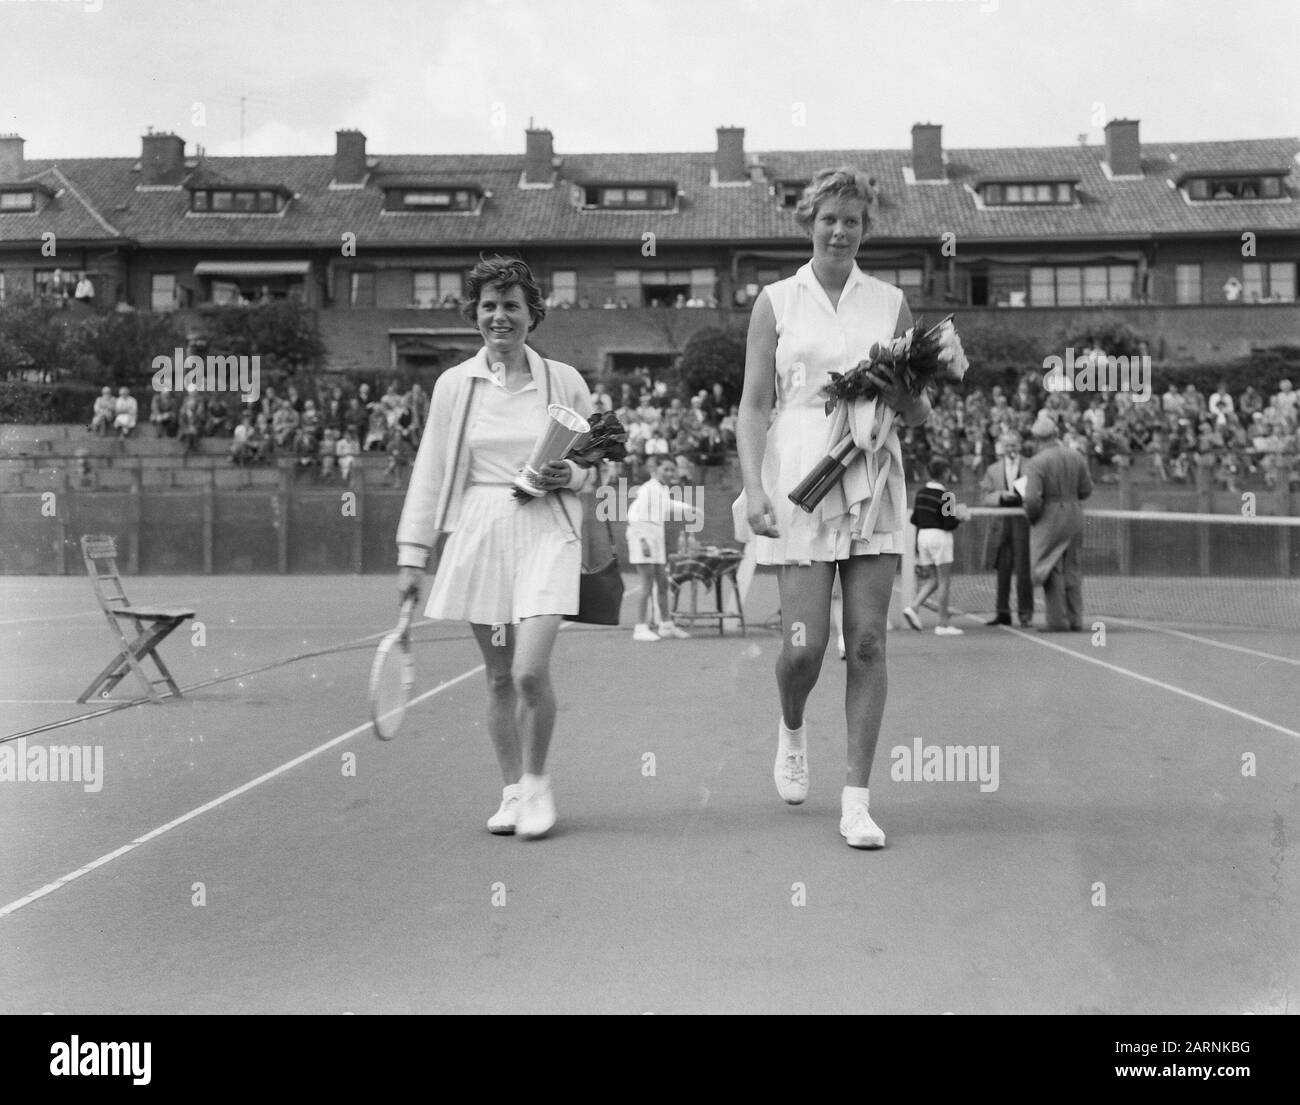 Tennis Championships at the METS courts. Left Mrs. Rouwenhorst, right mej. F. Marinkelre Date: August 18, 1957 Keywords: tennis championships Institution name: METS courts Stock Photo